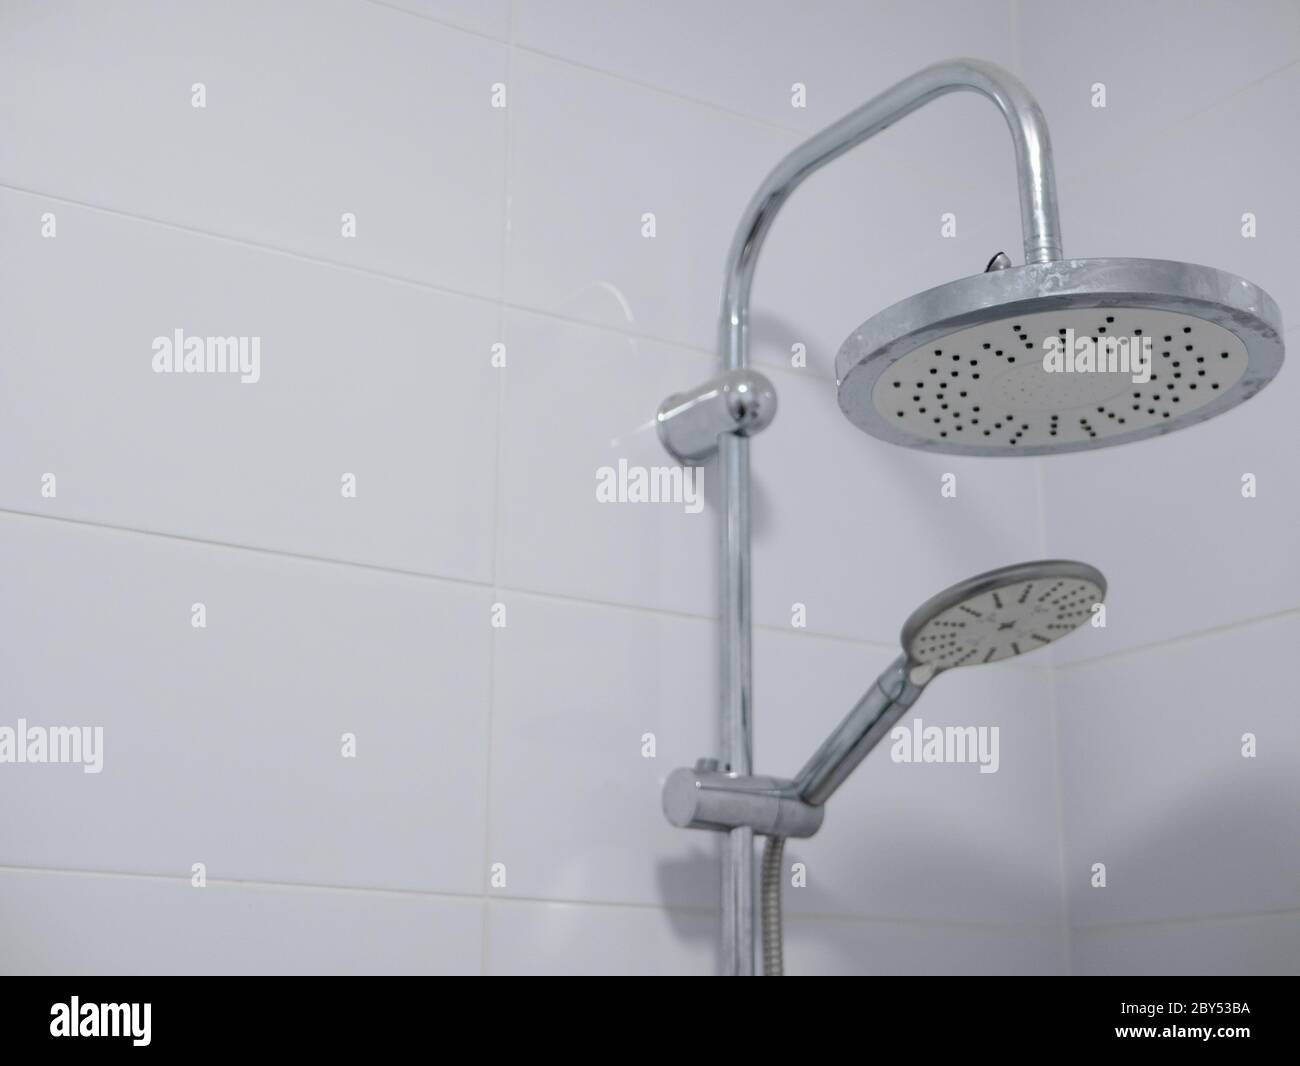 https://c8.alamy.com/comp/2BY53BA/double-shower-heads-with-chrome-finish-in-clean-bathroom-with-pure-white-ceramic-tiles-close-upimage-with-copy-space-2BY53BA.jpg